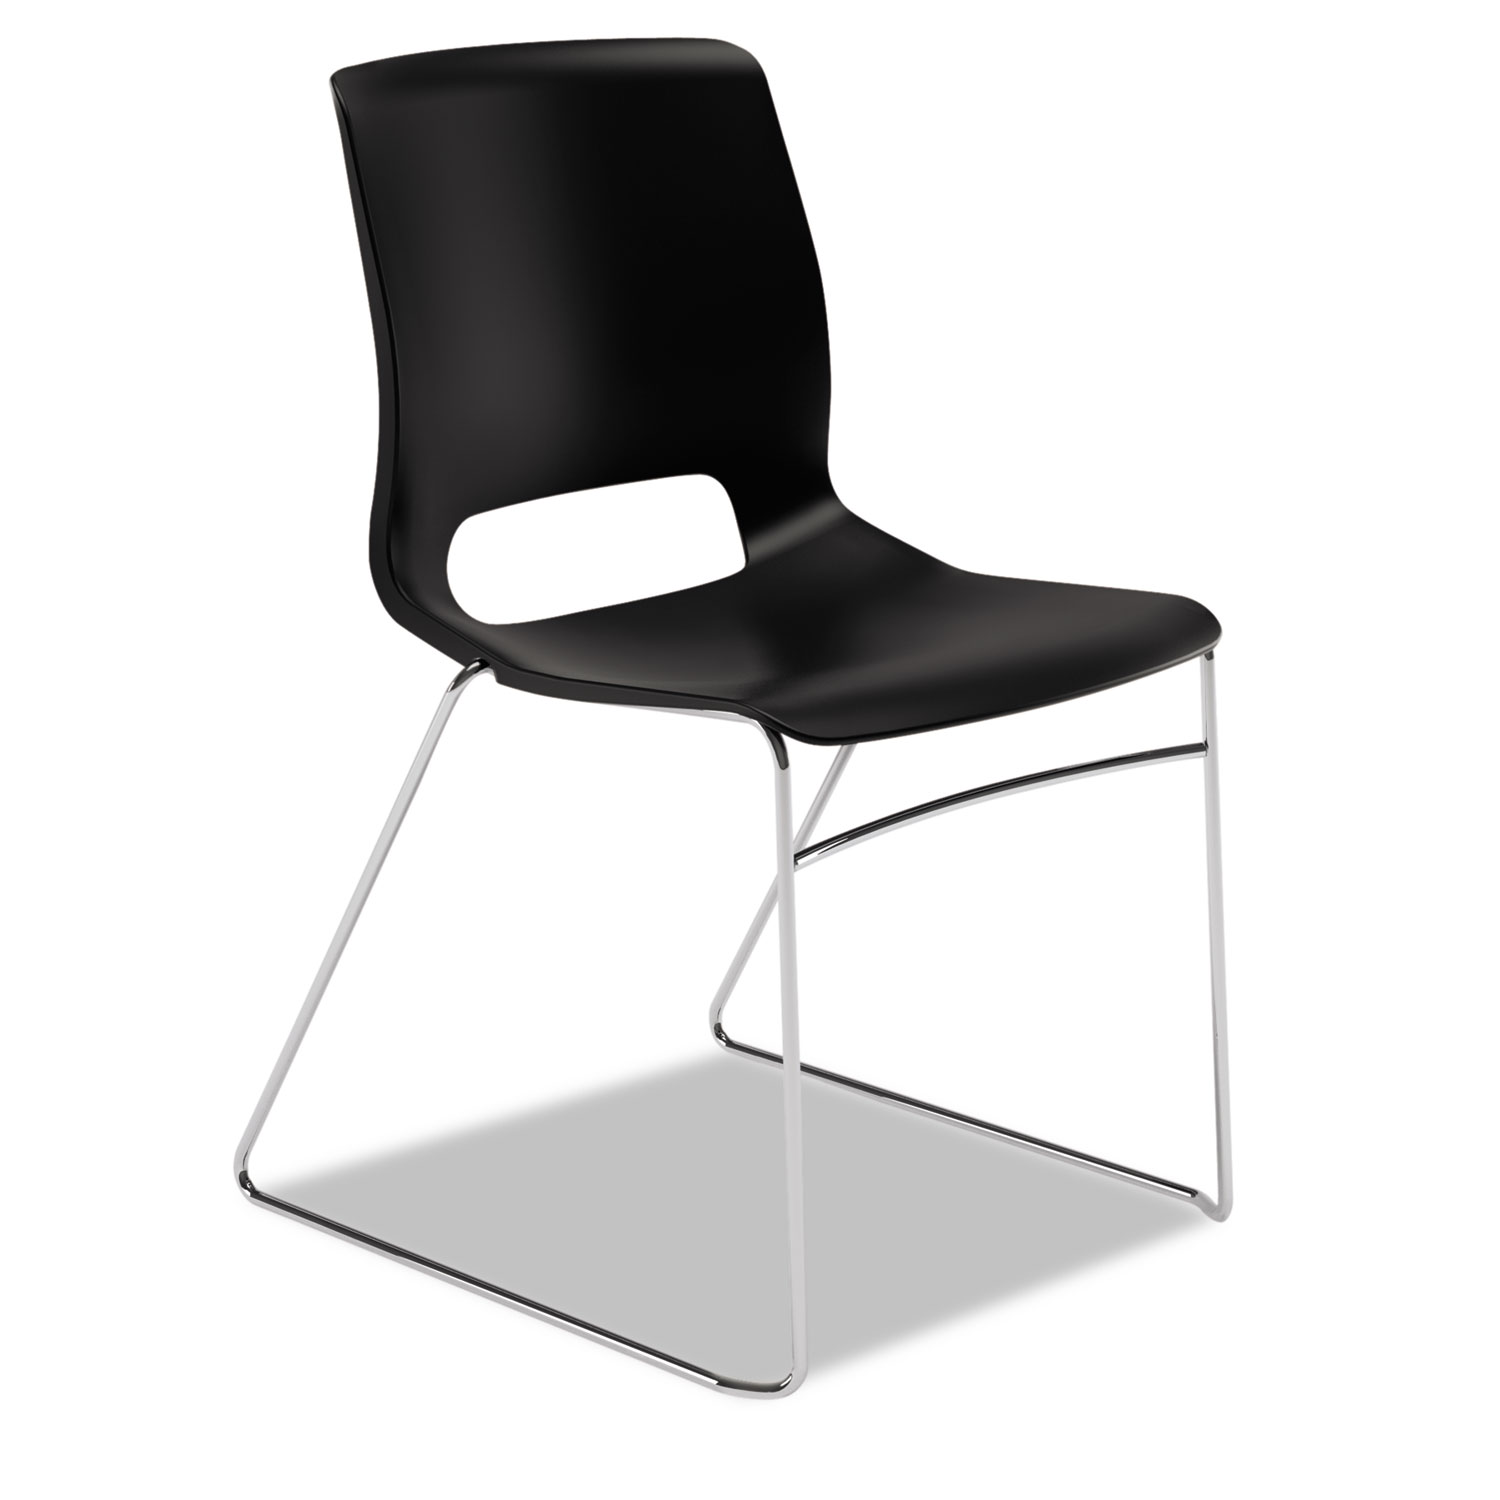 Motivate Seating High-Density Stacking Chair, Onyx/Chrome, 4/Carton